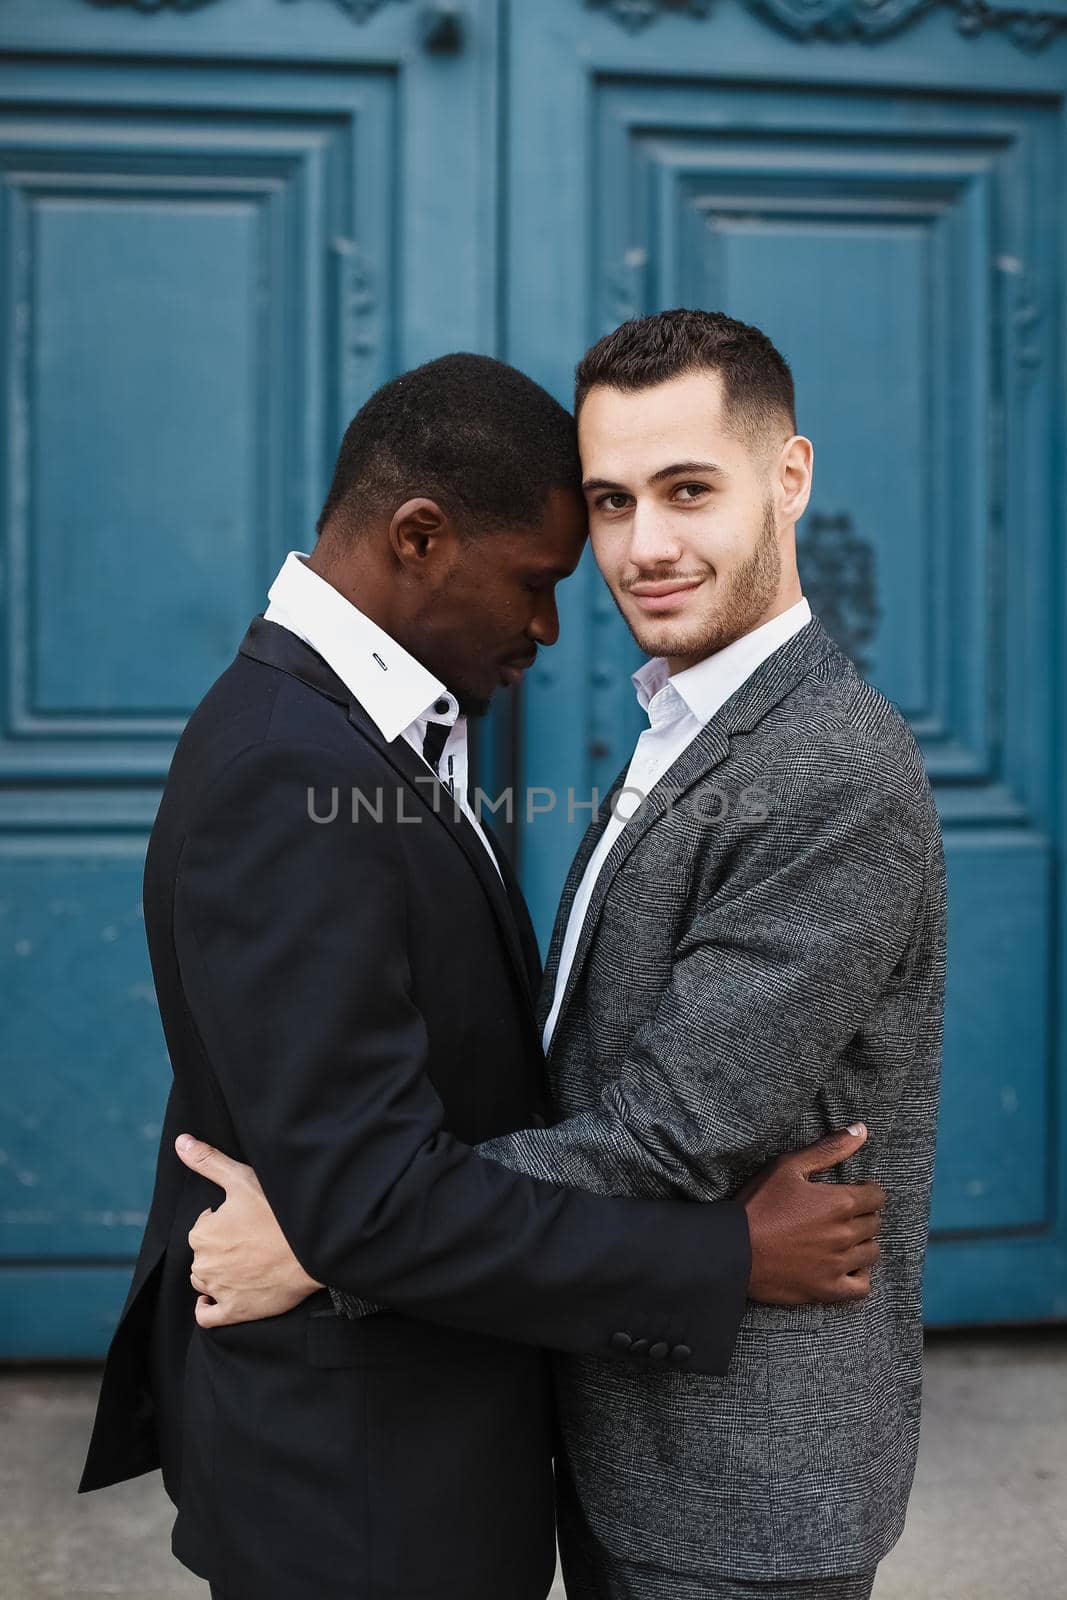 Afro american handsome man hugging caucasian guy in door background, wearing suit. Concept of same sex couple and gays.